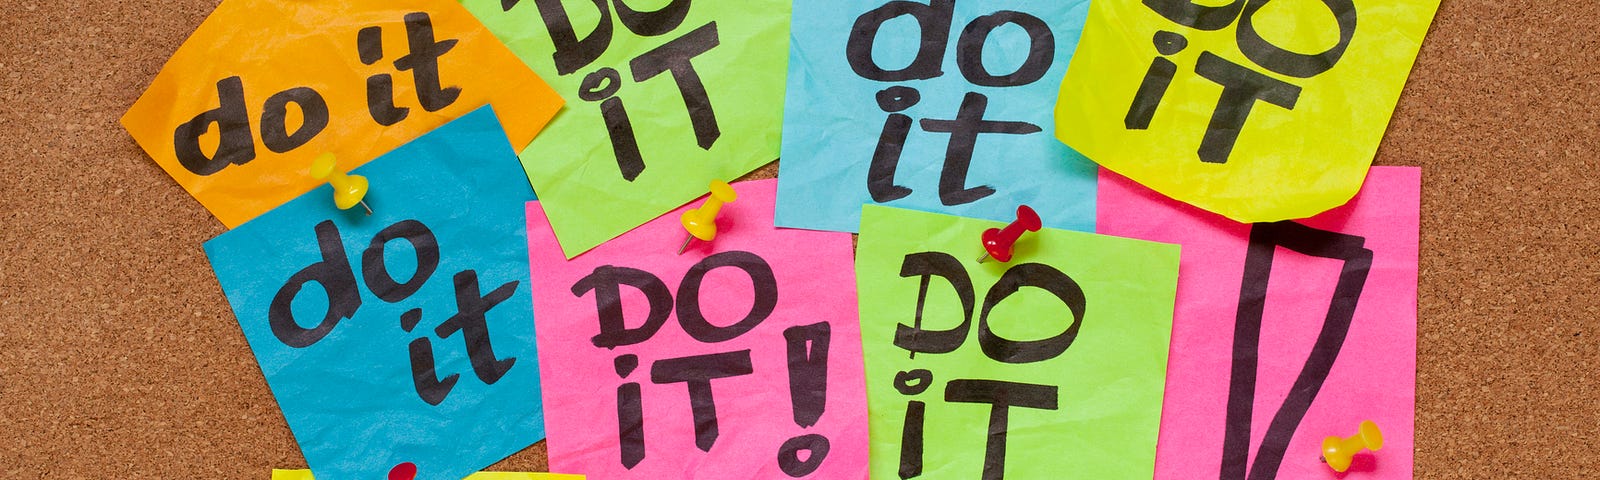 Post-it notes with the phrase “Do it” on a bulletin board